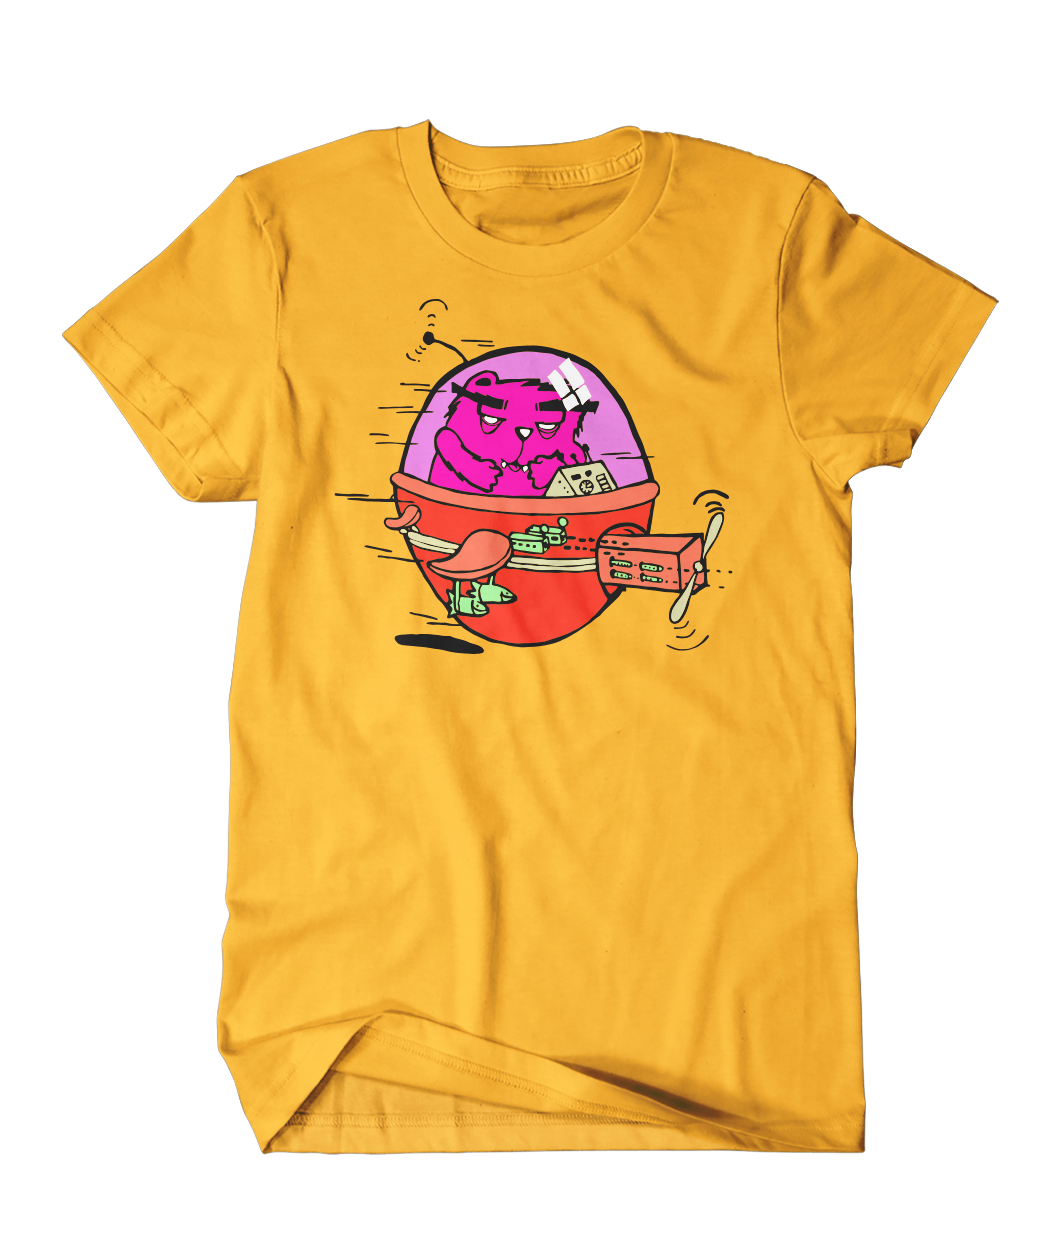 A yellow shirt with an illustration of a pink Kedicizdim cat piloting a whimsical pink and yellow cobbled together aircraft. The design is large and centered on the shirt.